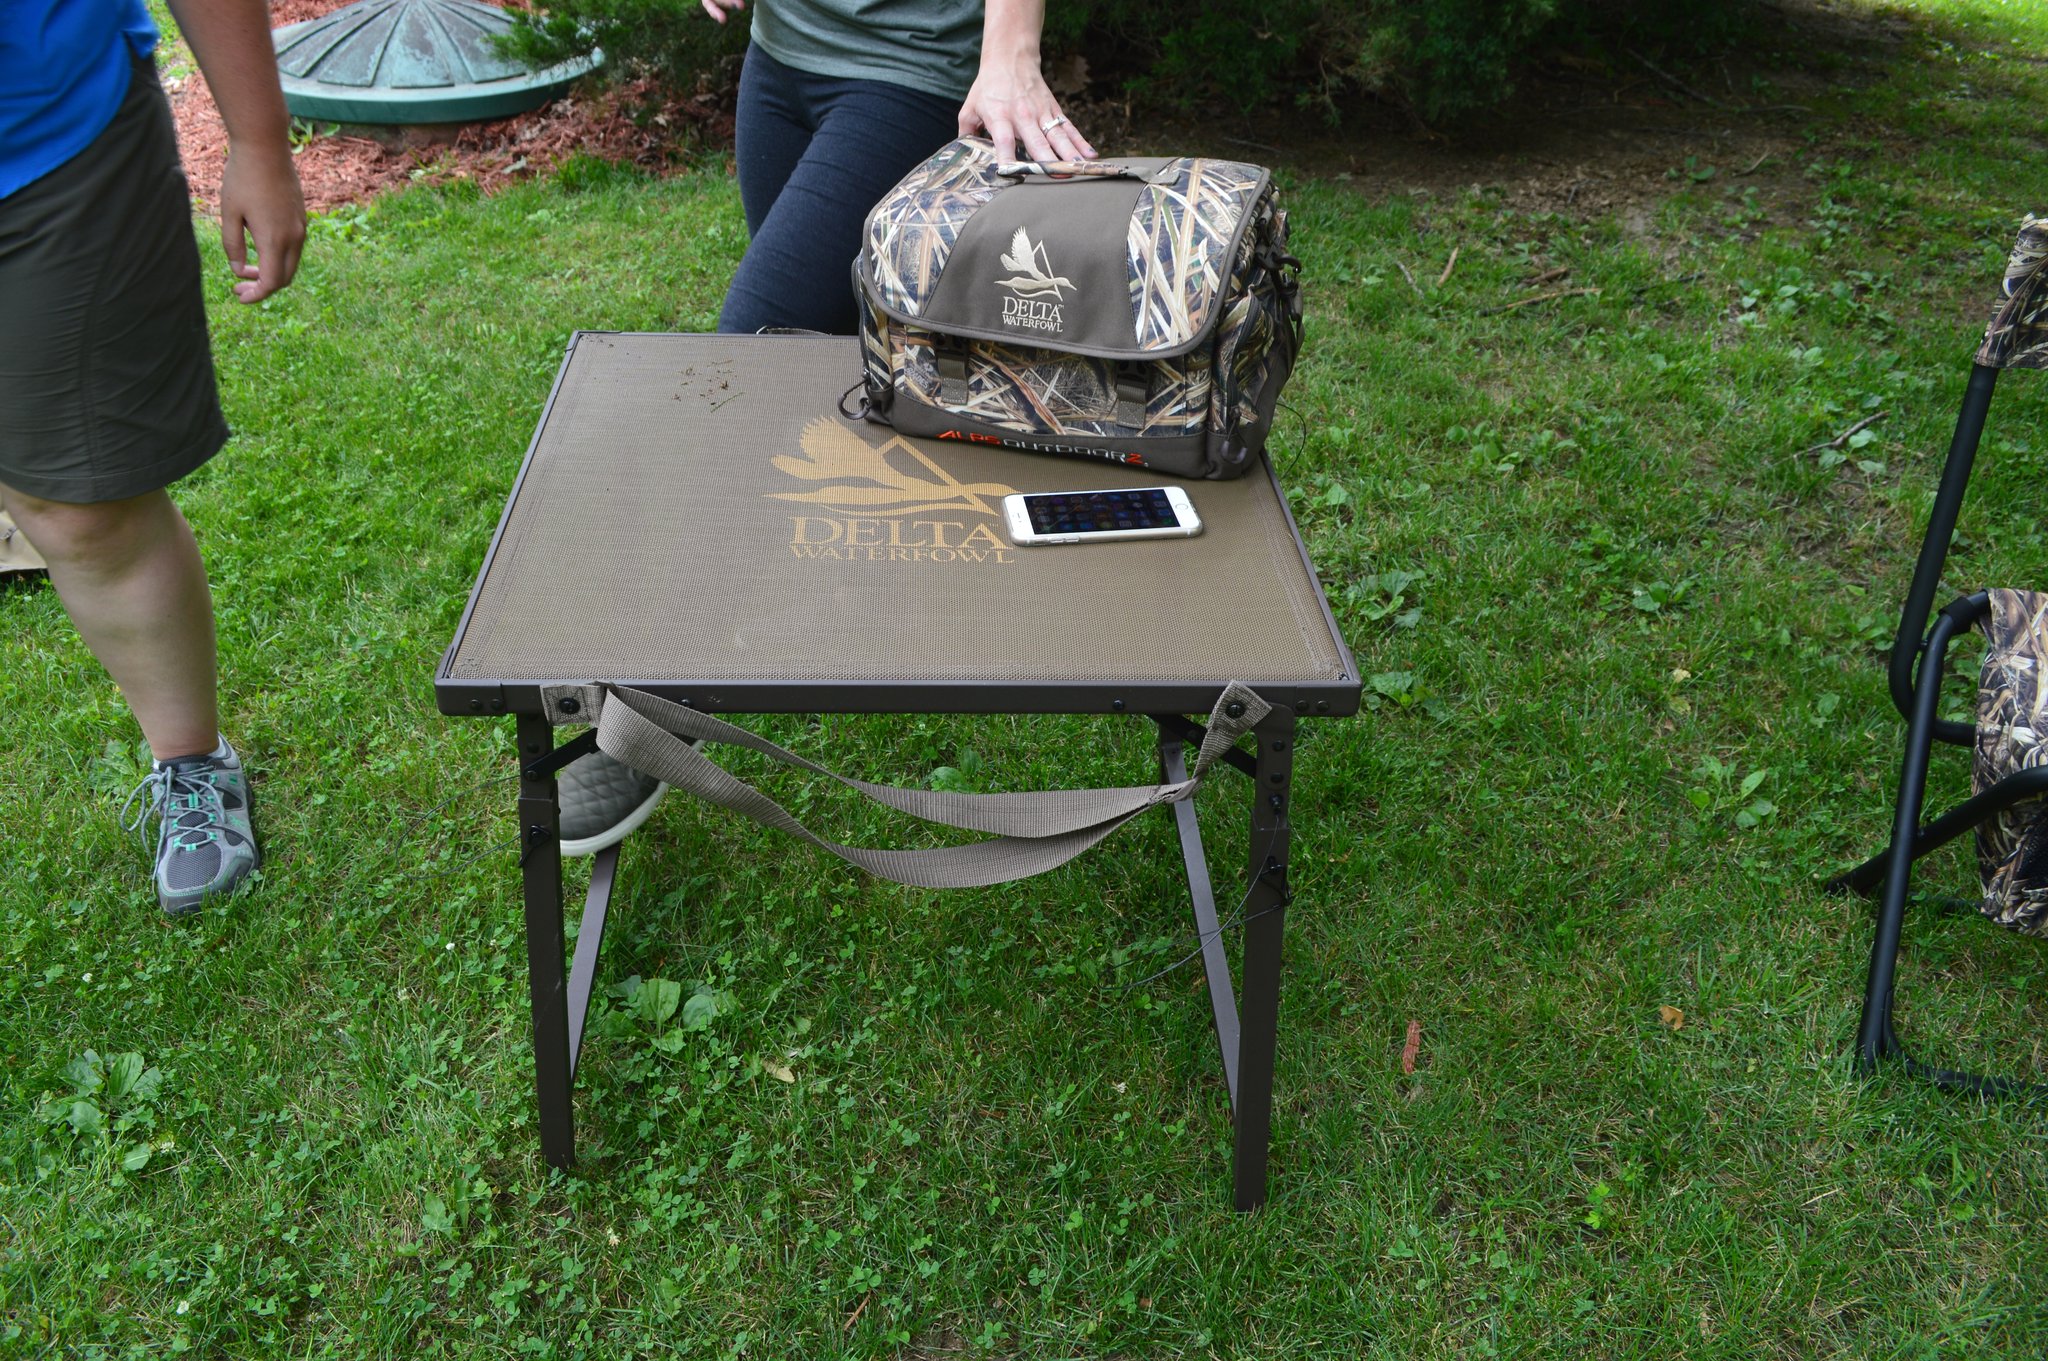 Delta Waterfowl is one of Alps brands, and they make gear for the serious goose and duck hunters. Shown here is their new Dog Stand. Its solid yet portable build is designed to keep your furry hunting companion out of the cold water and muck. The height is fully adjustable and the entire unit packs flat and is easy to carry with the integral shoulder strap. (Photo: Kristin Alberts)